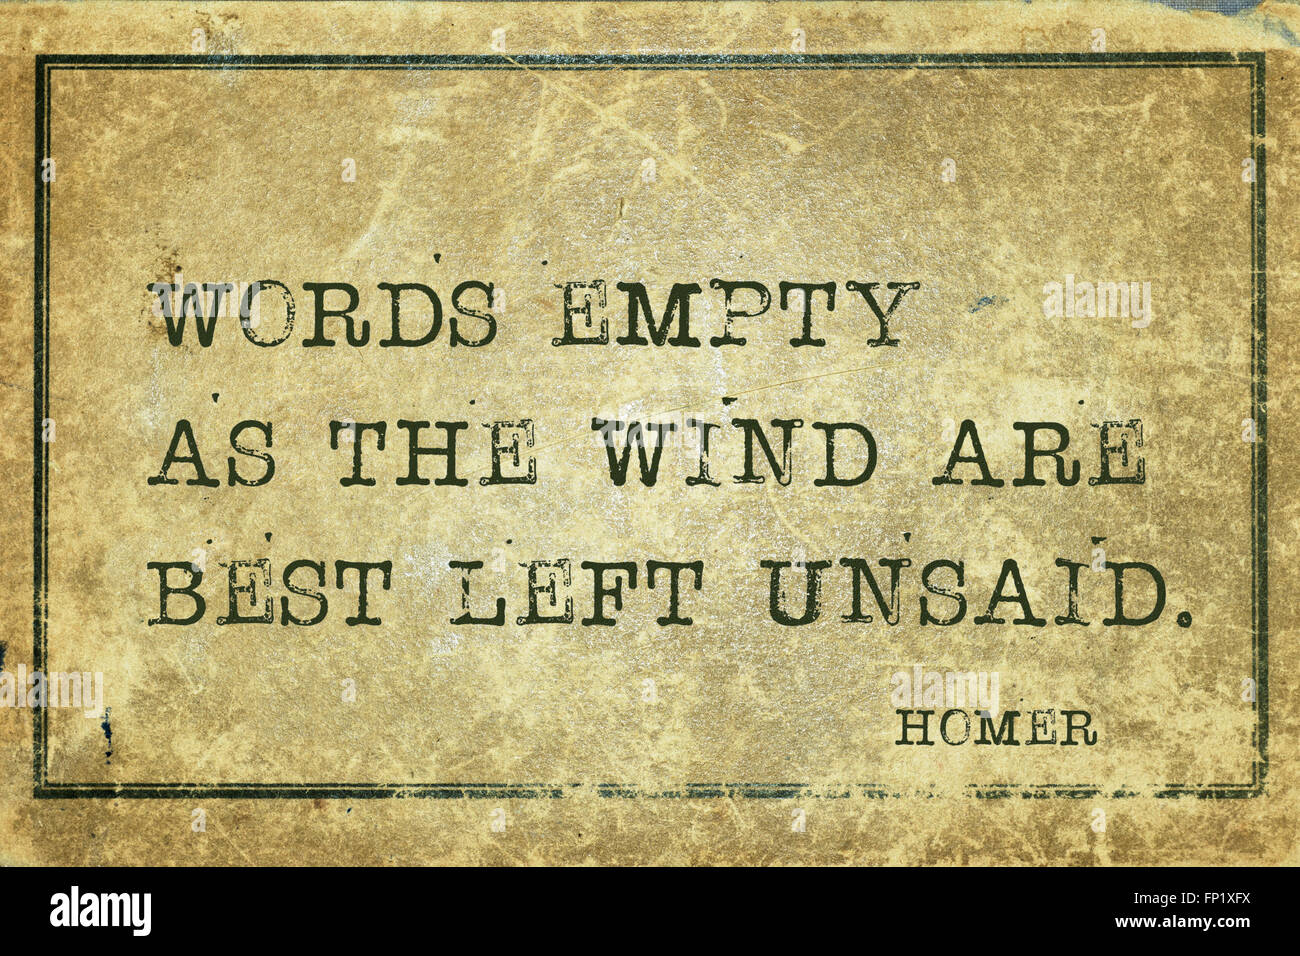 words empty as the wind are best left unsaid ancient greek poet homer FP1XFX